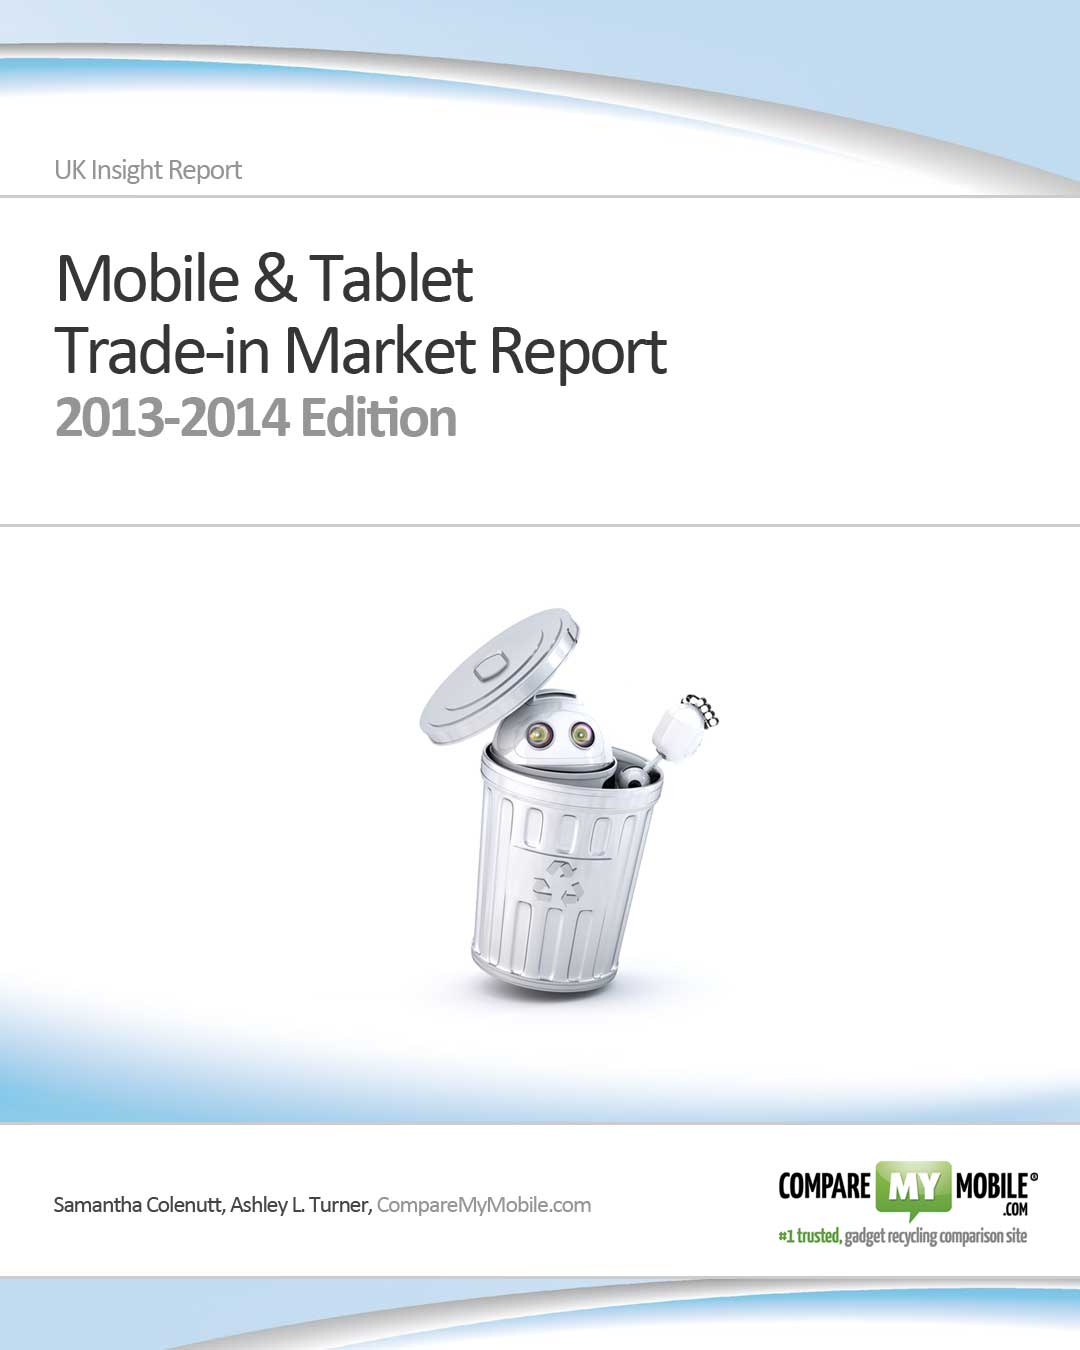 The Mobile and Tablet Trade-in Industry Report 2013-2014 shows comprehensive analysis of pricing and depreciation trends of mobile devices, brands and operating platforms